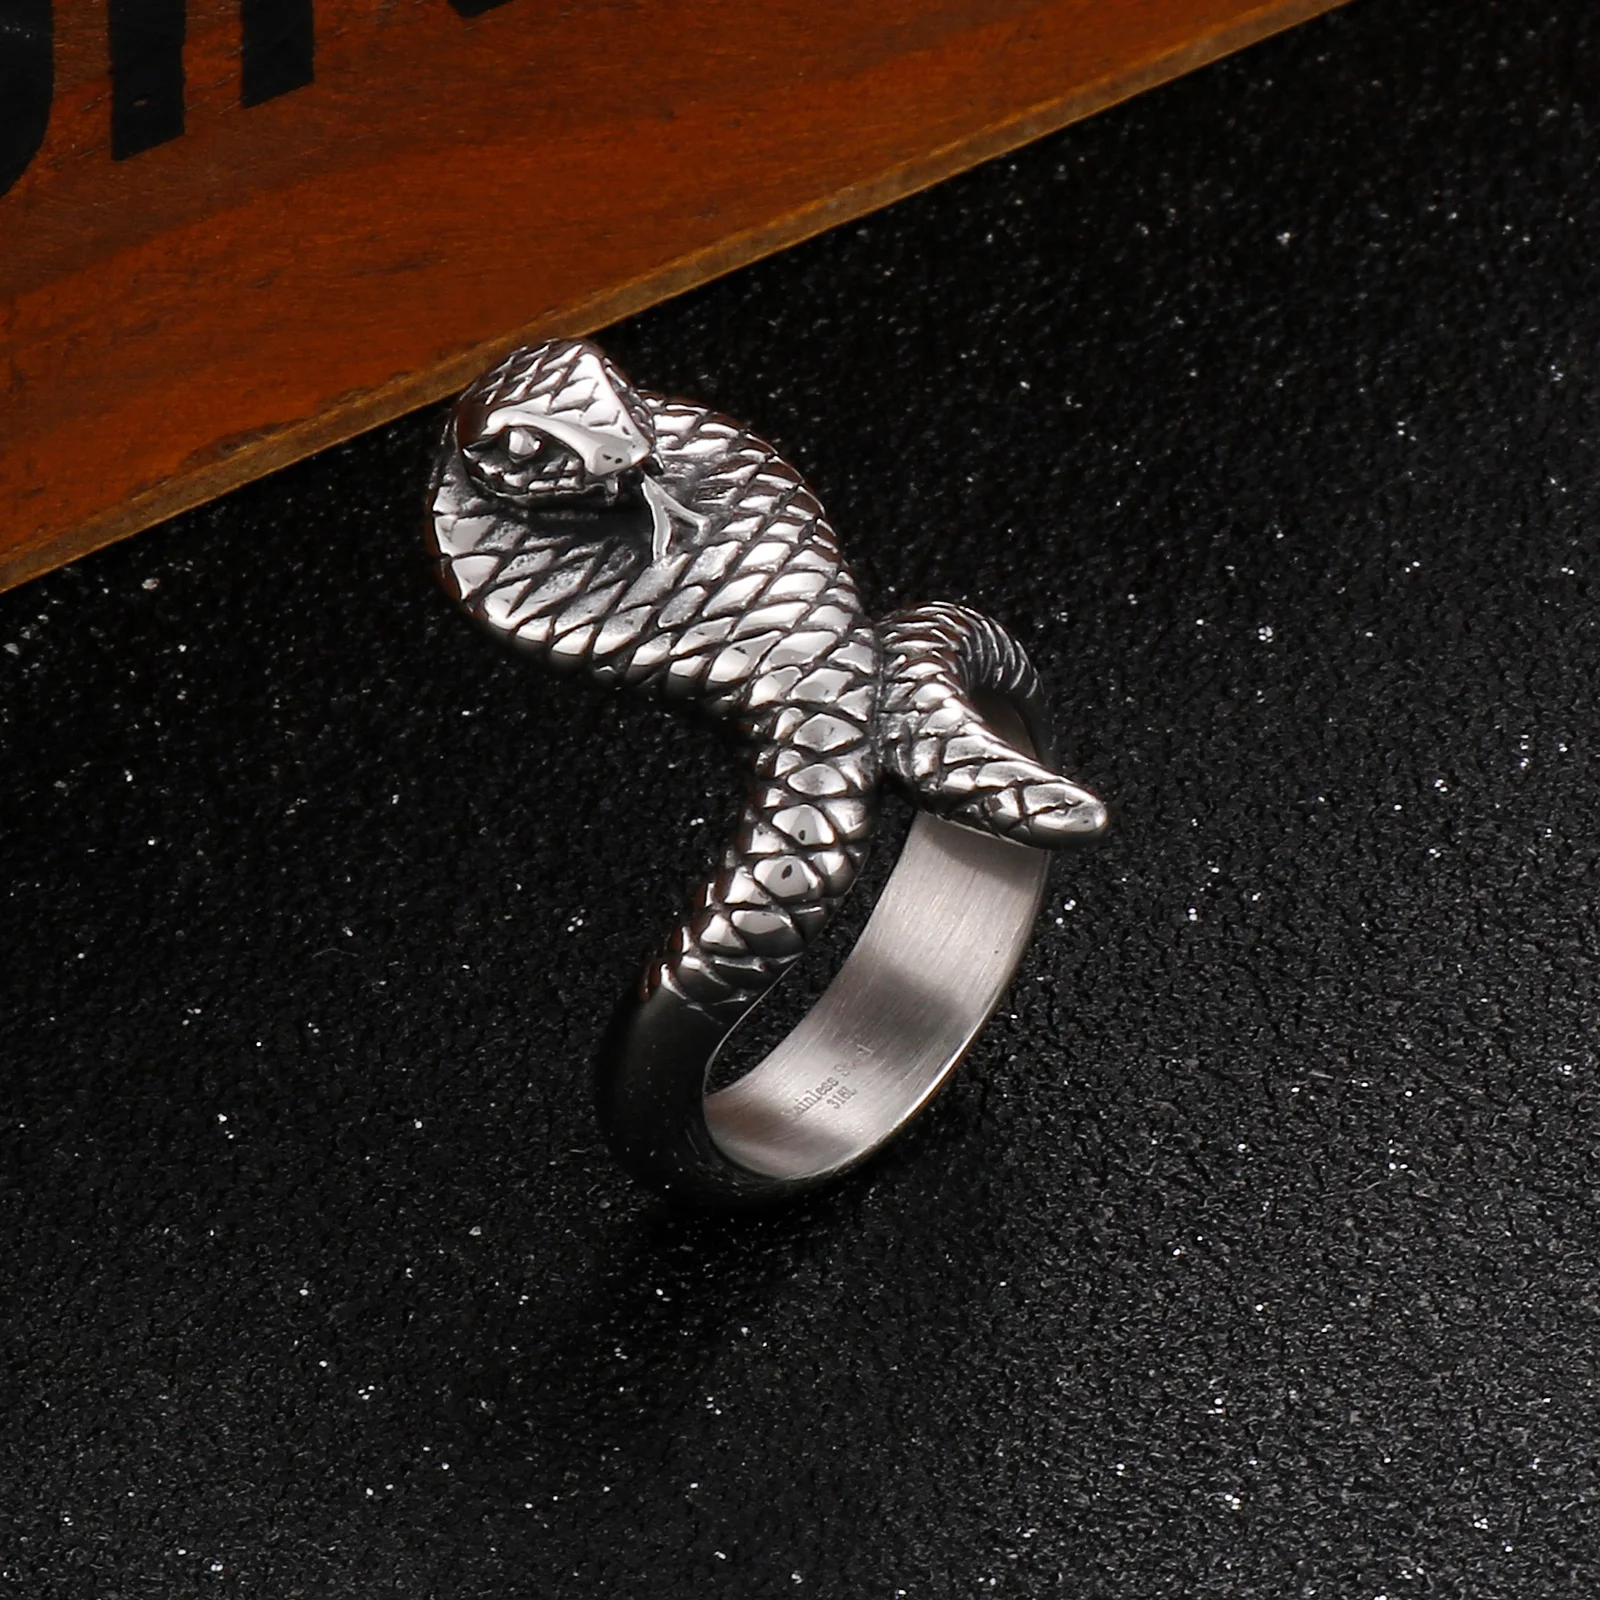 

HAOYI Personality Snake Ring For Men Fashion Silver Color Stainless Steel Rings Punk Jewelry Gift